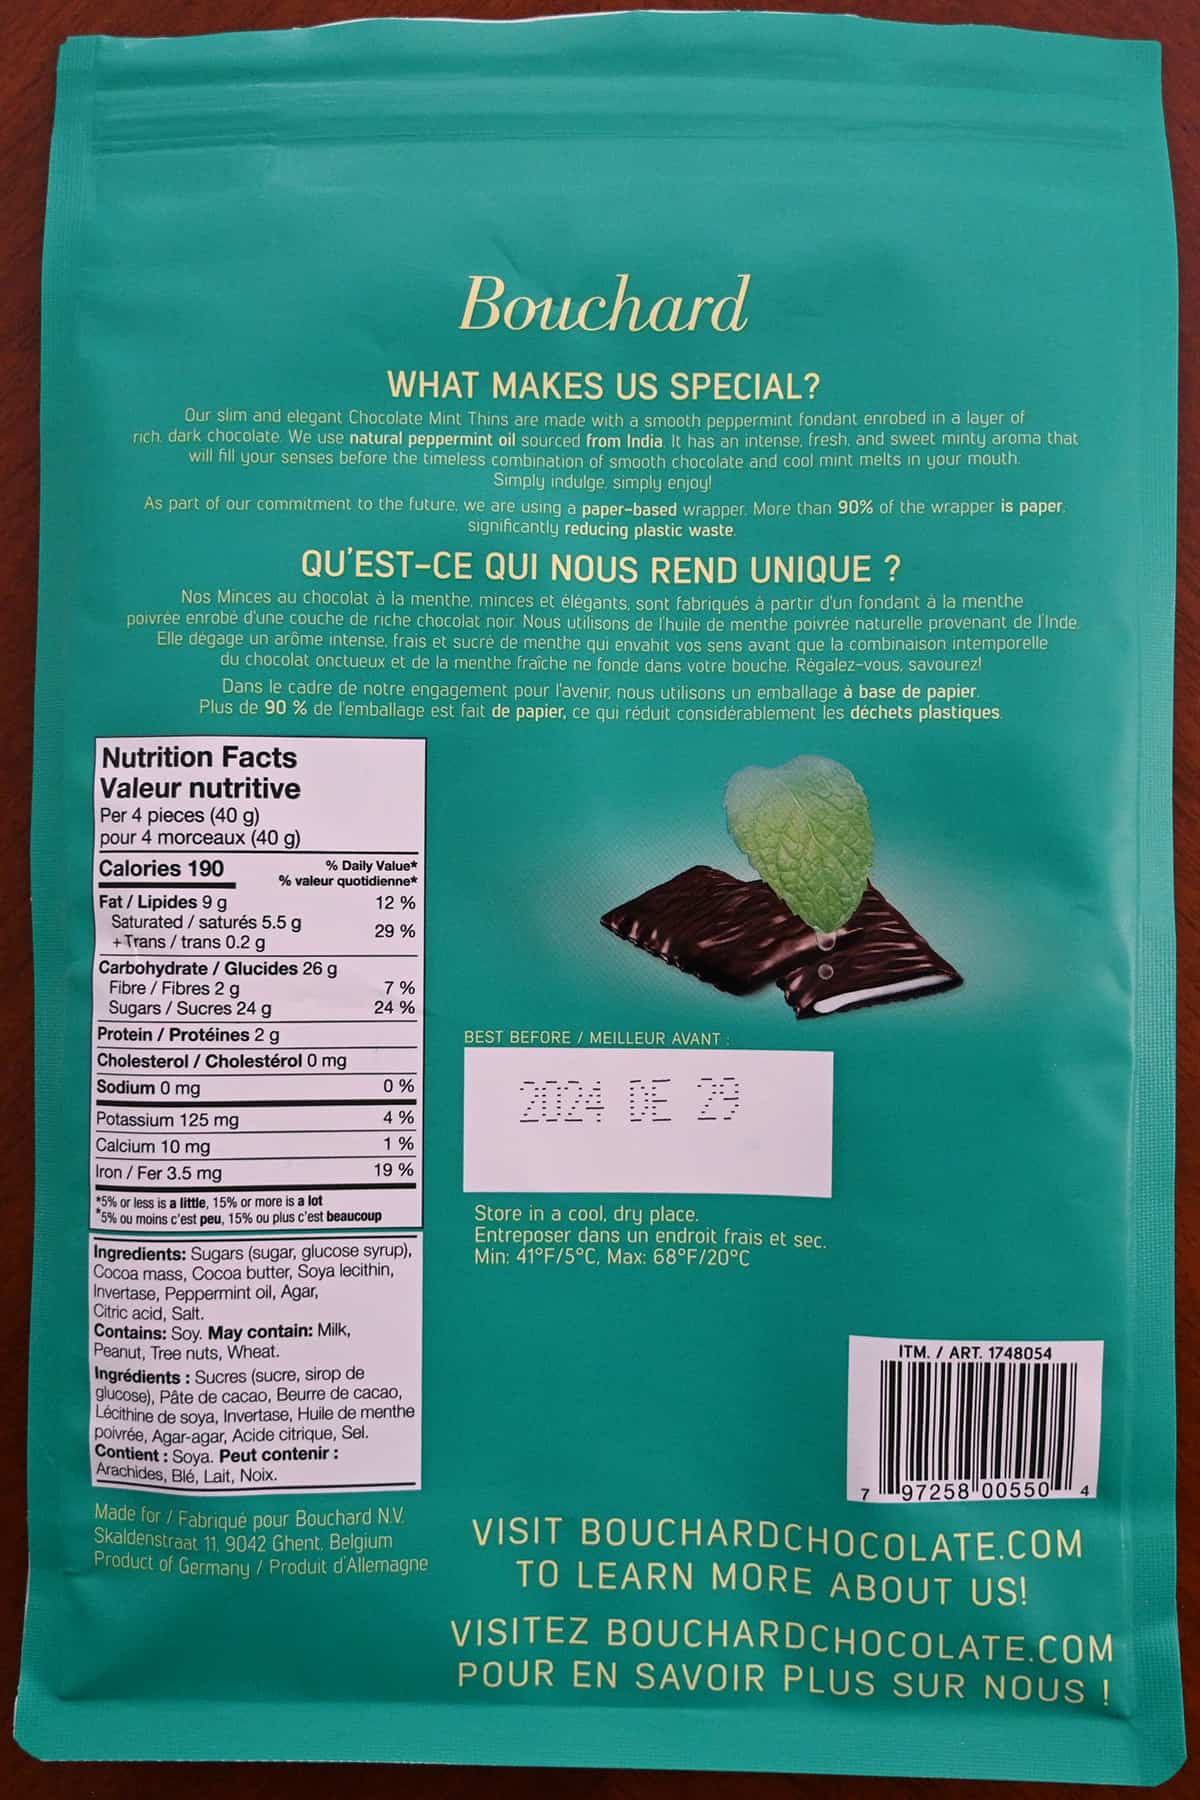 Image of the back of the bag of mint chocolates showing expiry date, product description and they they're made in Belgium.